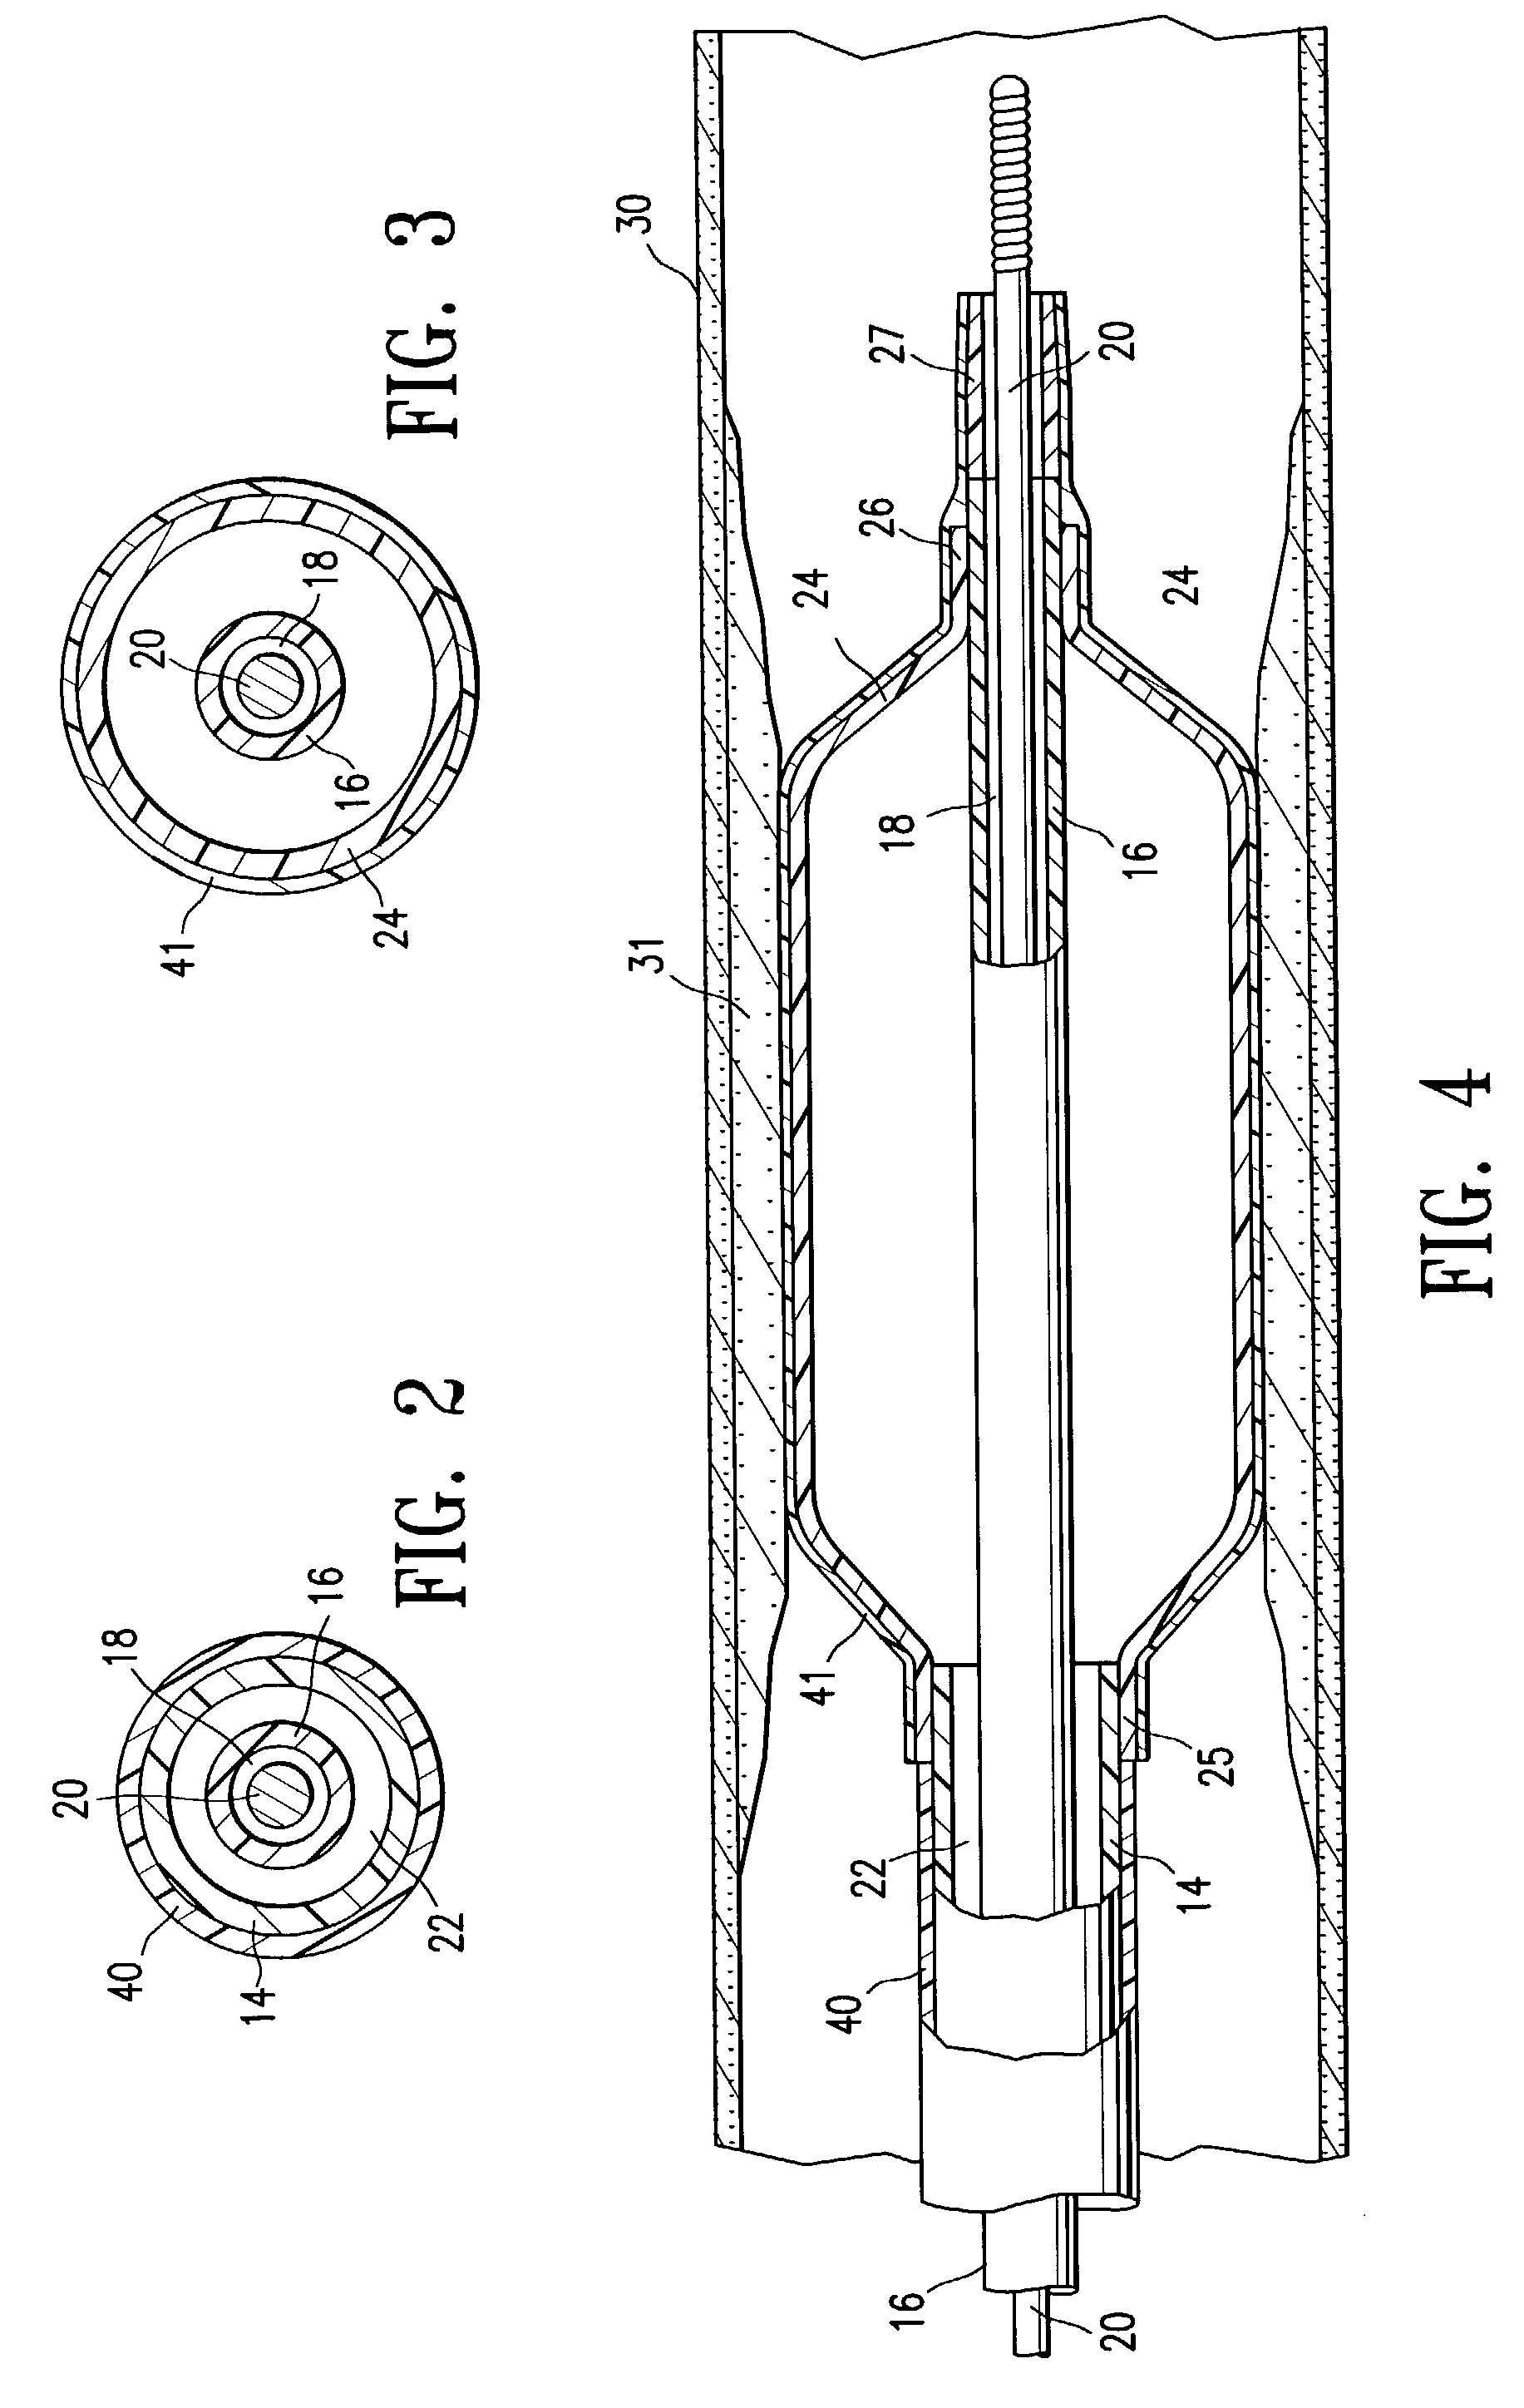 Reduced slippage balloon catheter and method of using same